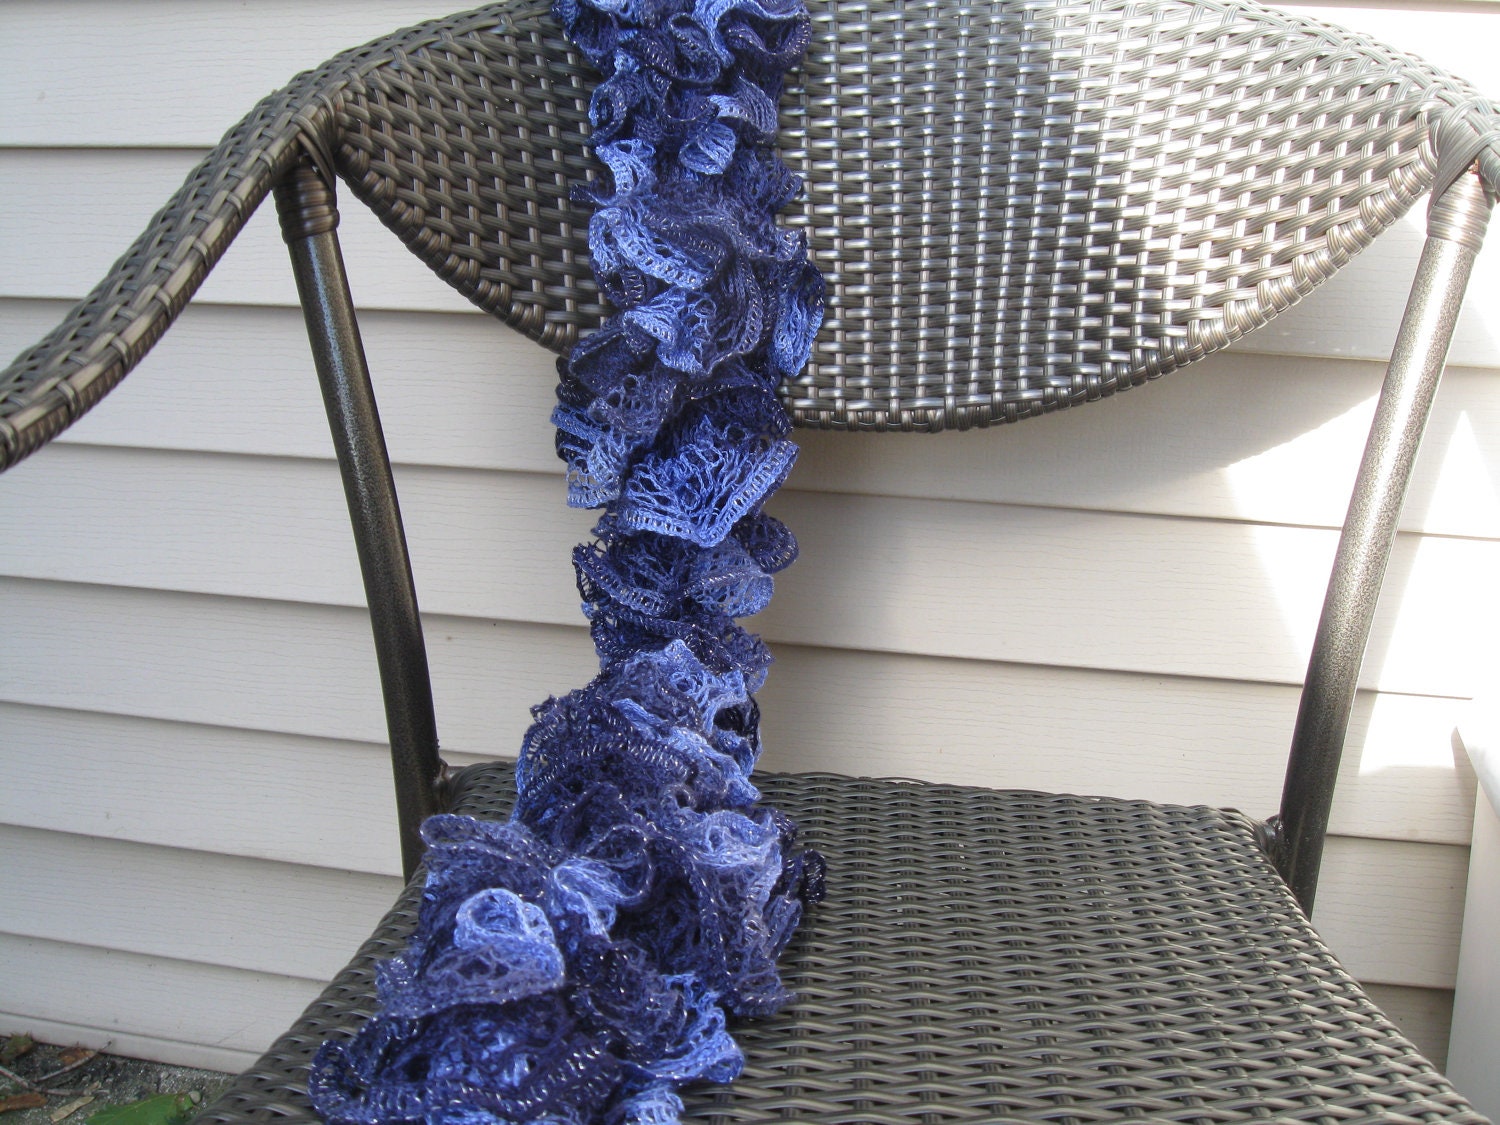 Ruffled Shades of Blue Lace Yarn Hand Knitted Soft Acrylic Scarf 55 inches long